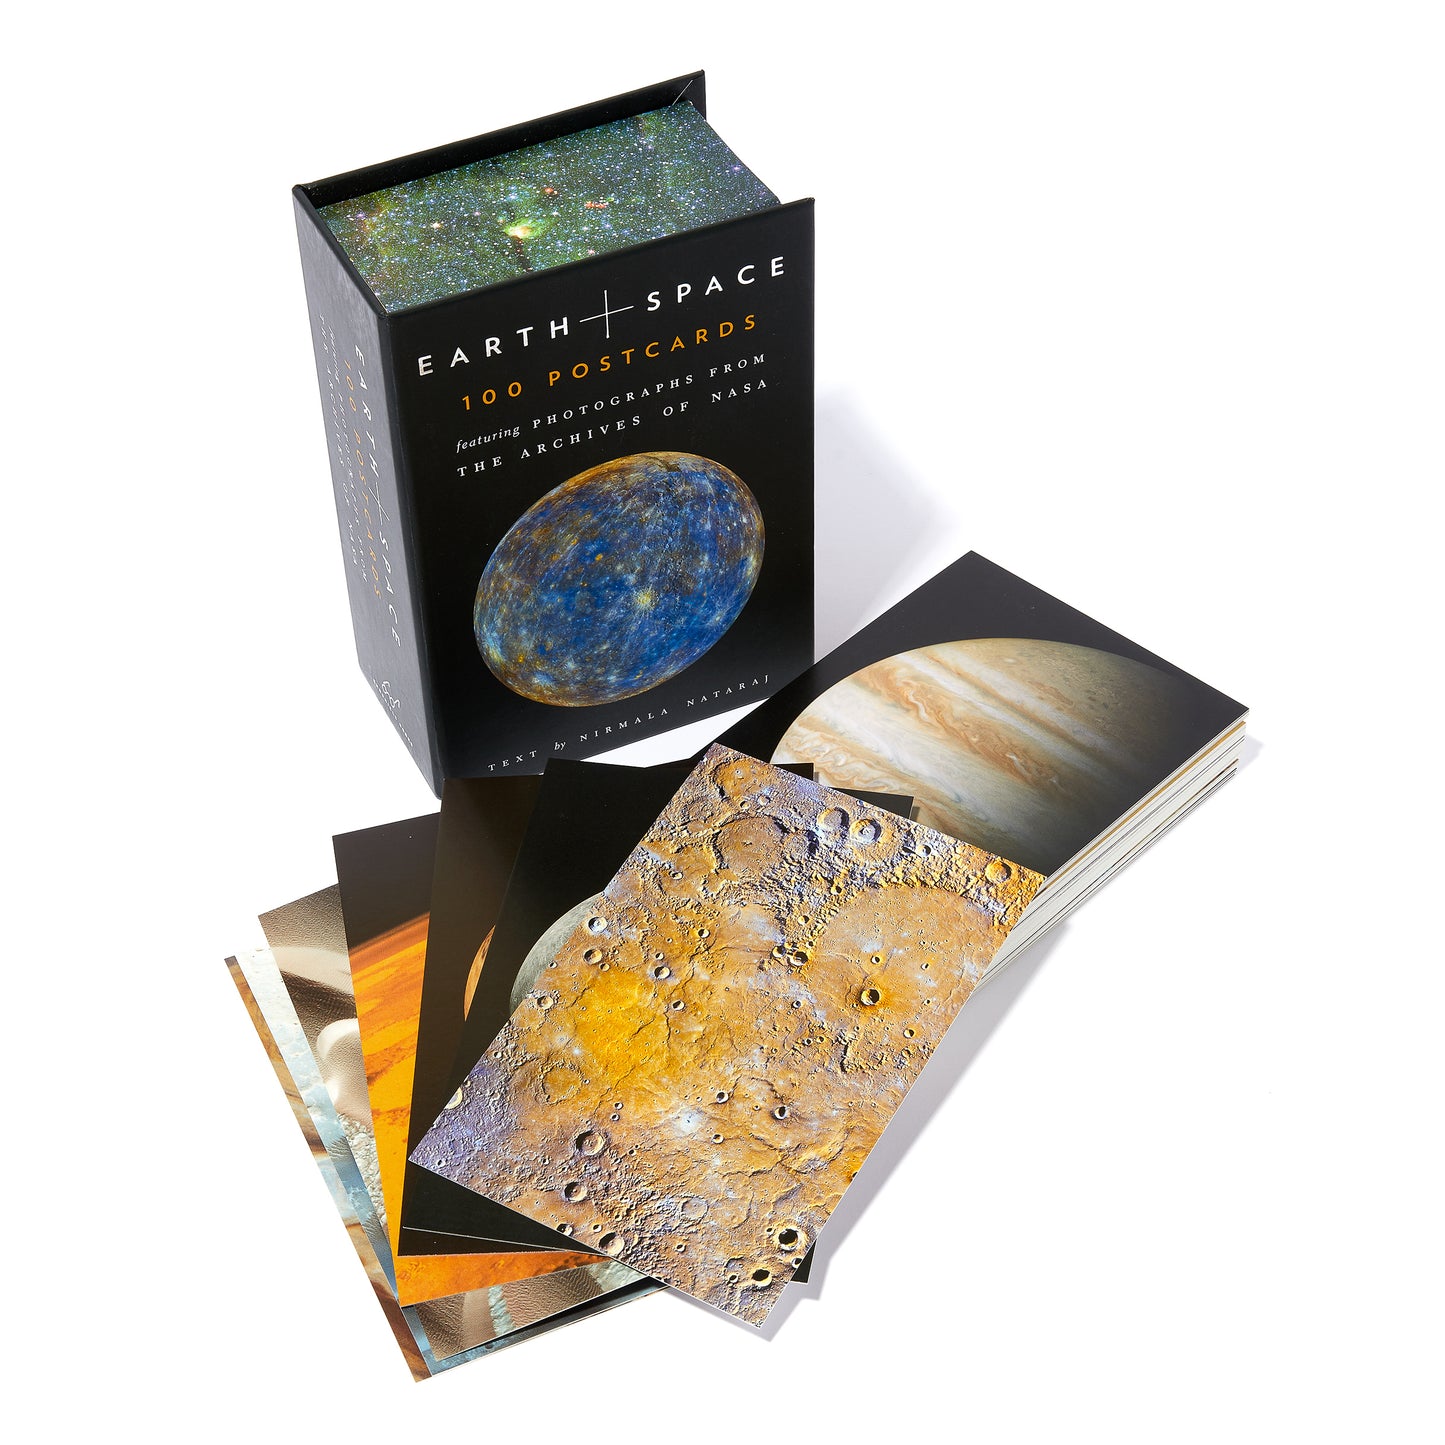 EARTH AND SPACE POSTCARD SET